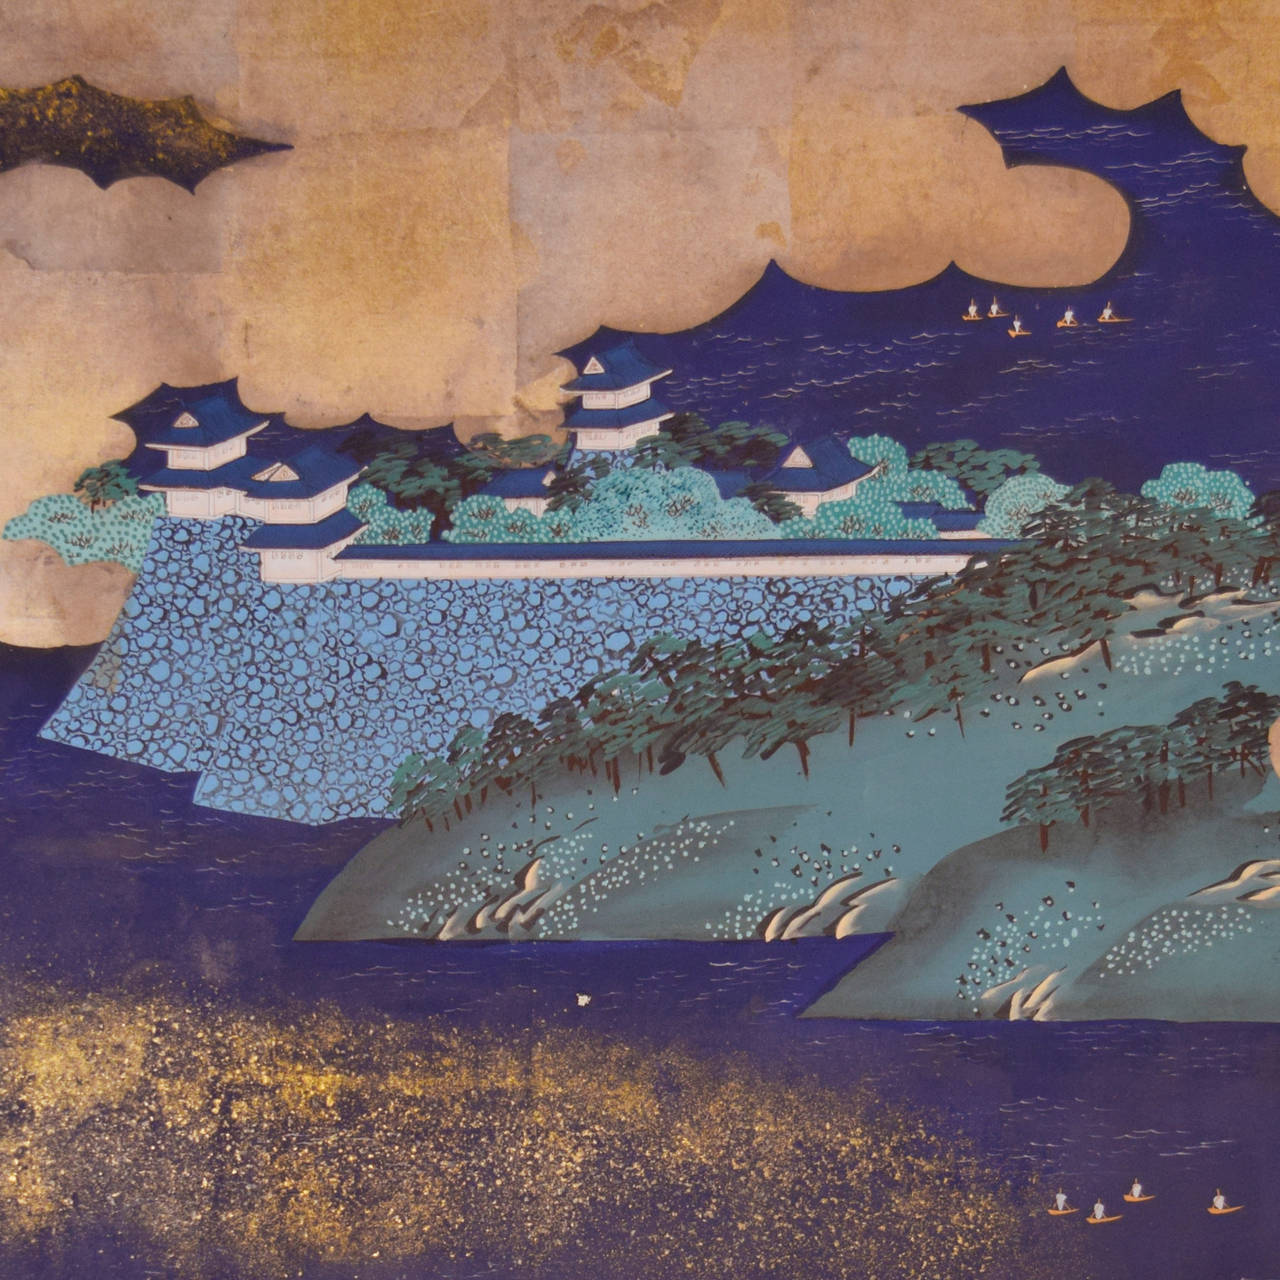 An impressive Meji period Japanese six-panel byobu screen from 1870-1900 depicting a palatial community compound on vibrant cliffs peeking through a morning fog of billowing gold leaf clouds, all overlooking a deep blue sea.